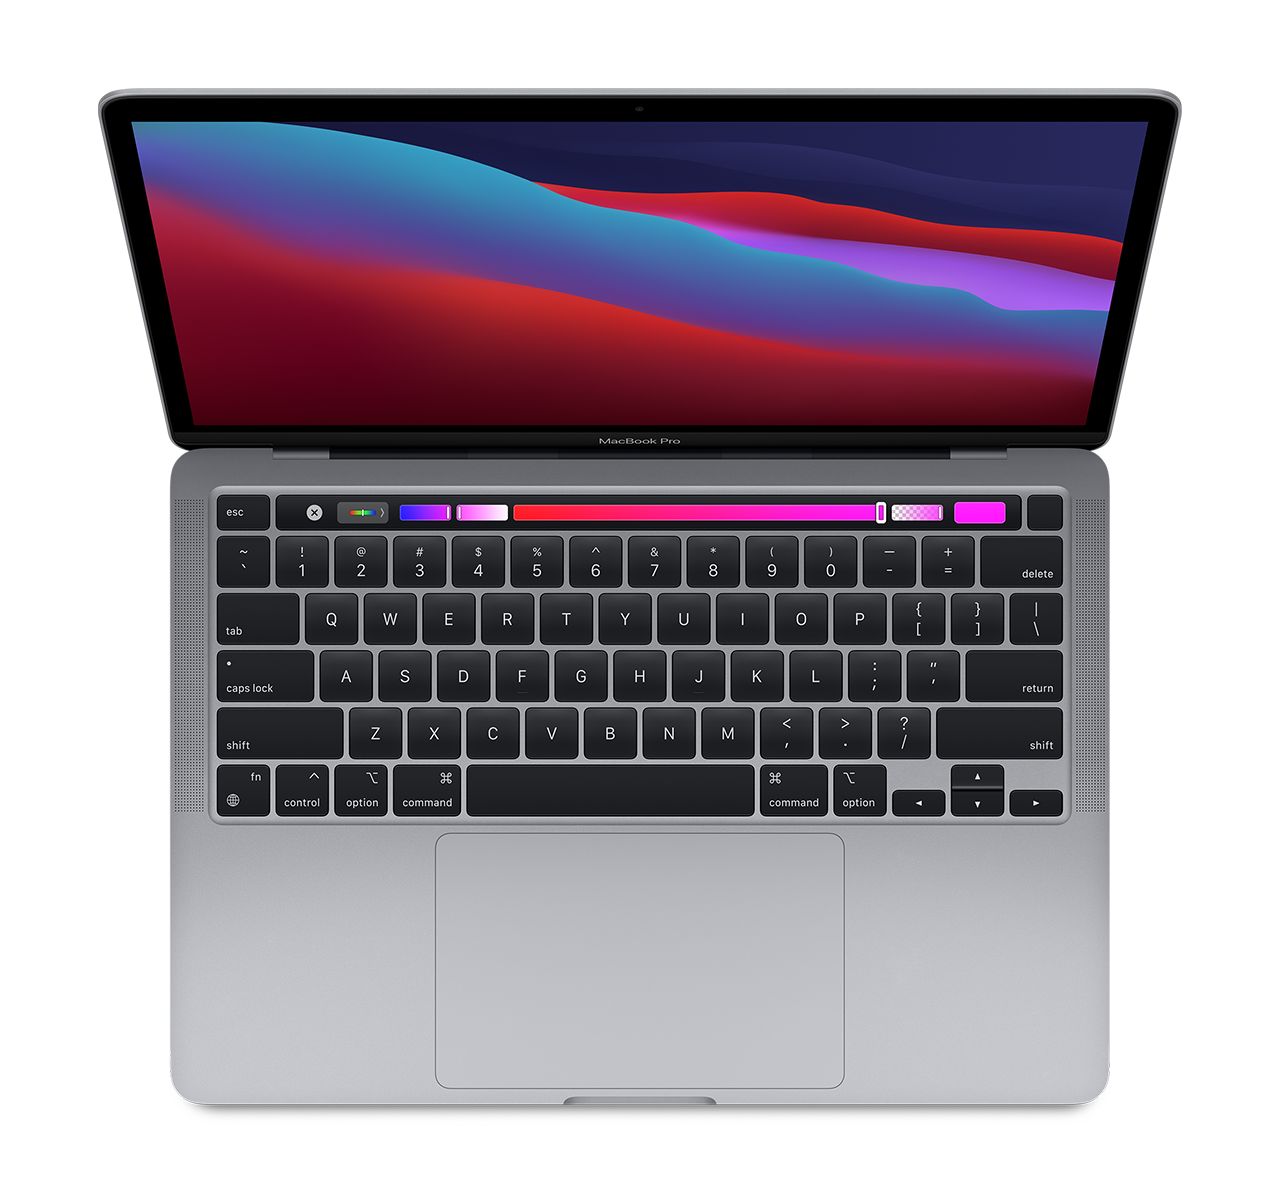 MacBook Pro (M1) 8GB RAM 512GB SSD storage M1 chip with 8-core CPU 13″ Retina Display with True Tone Backlit Magic Keyboard Touch Bar and Touch ID – Gadget Central